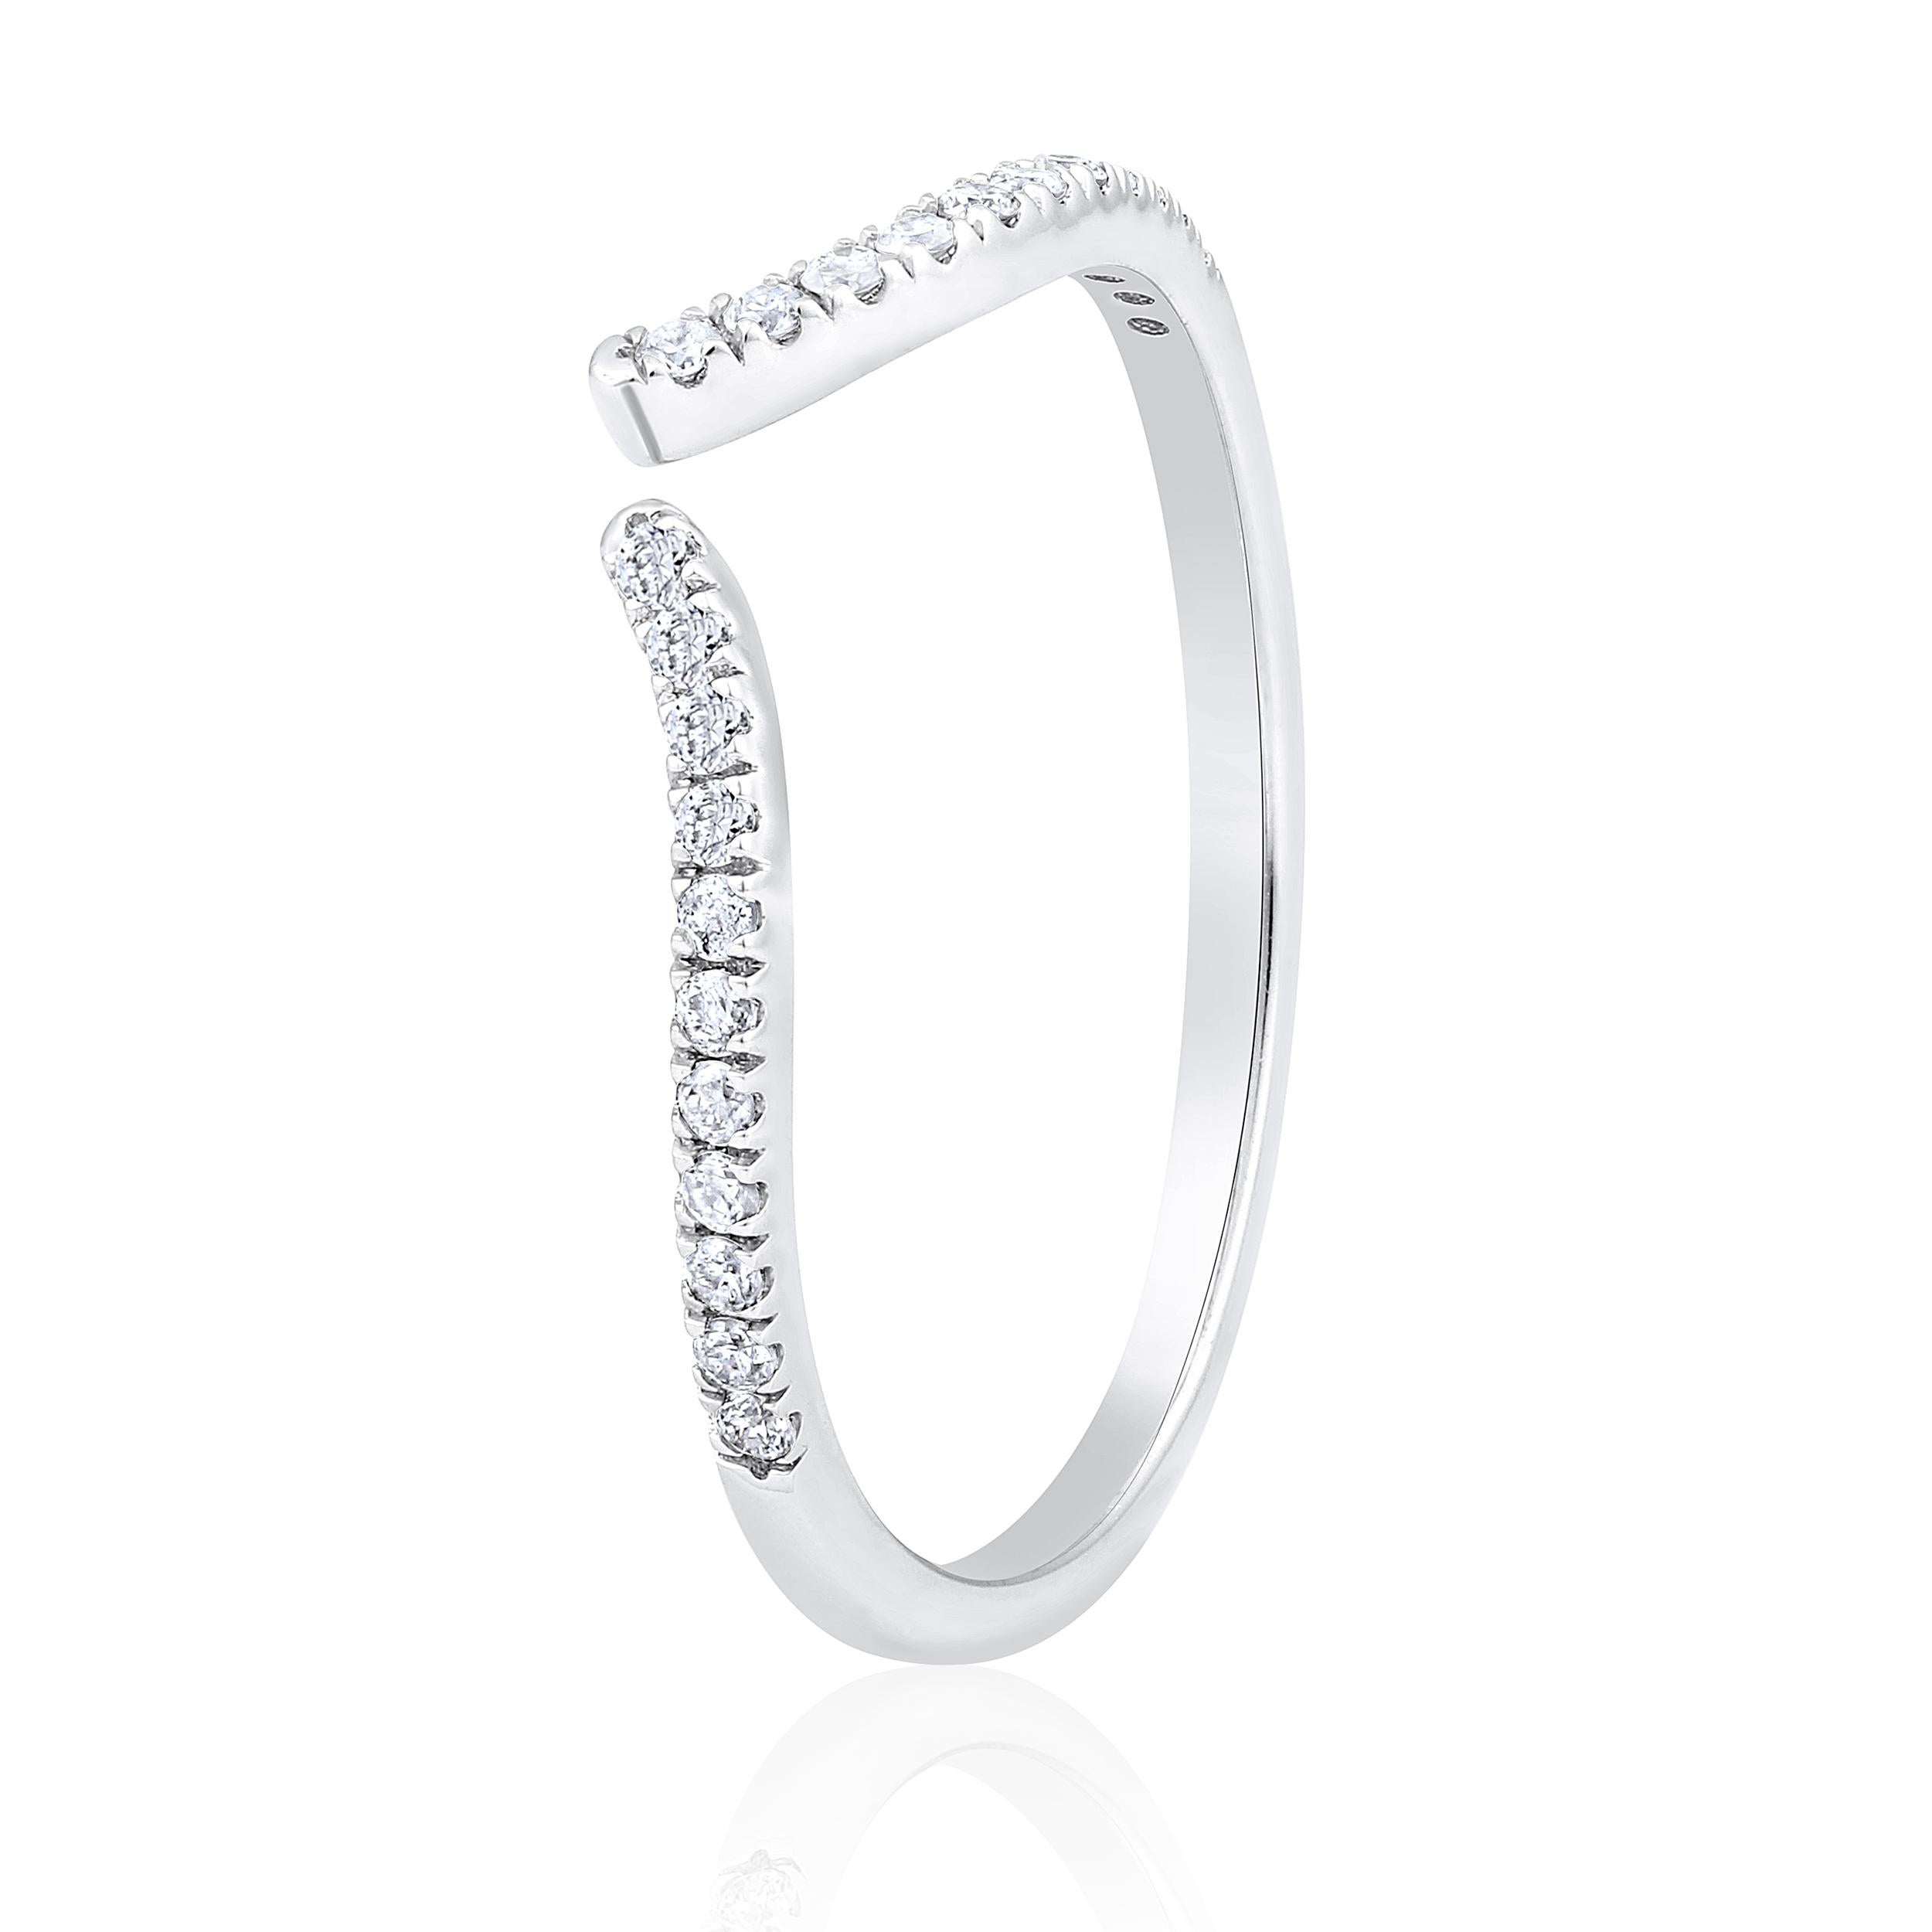 Ring Size: US 8 

Crafted in 1.06 grams of 10K White Gold, the ring contains 22 stones of Round Diamonds with a total of 0.155 carat in F-G color and I1-I2 clarity.

CONTEMPORARY AND TIMELESS ESSENCE: Crafted in 14-karat/18-karat with 100% natural